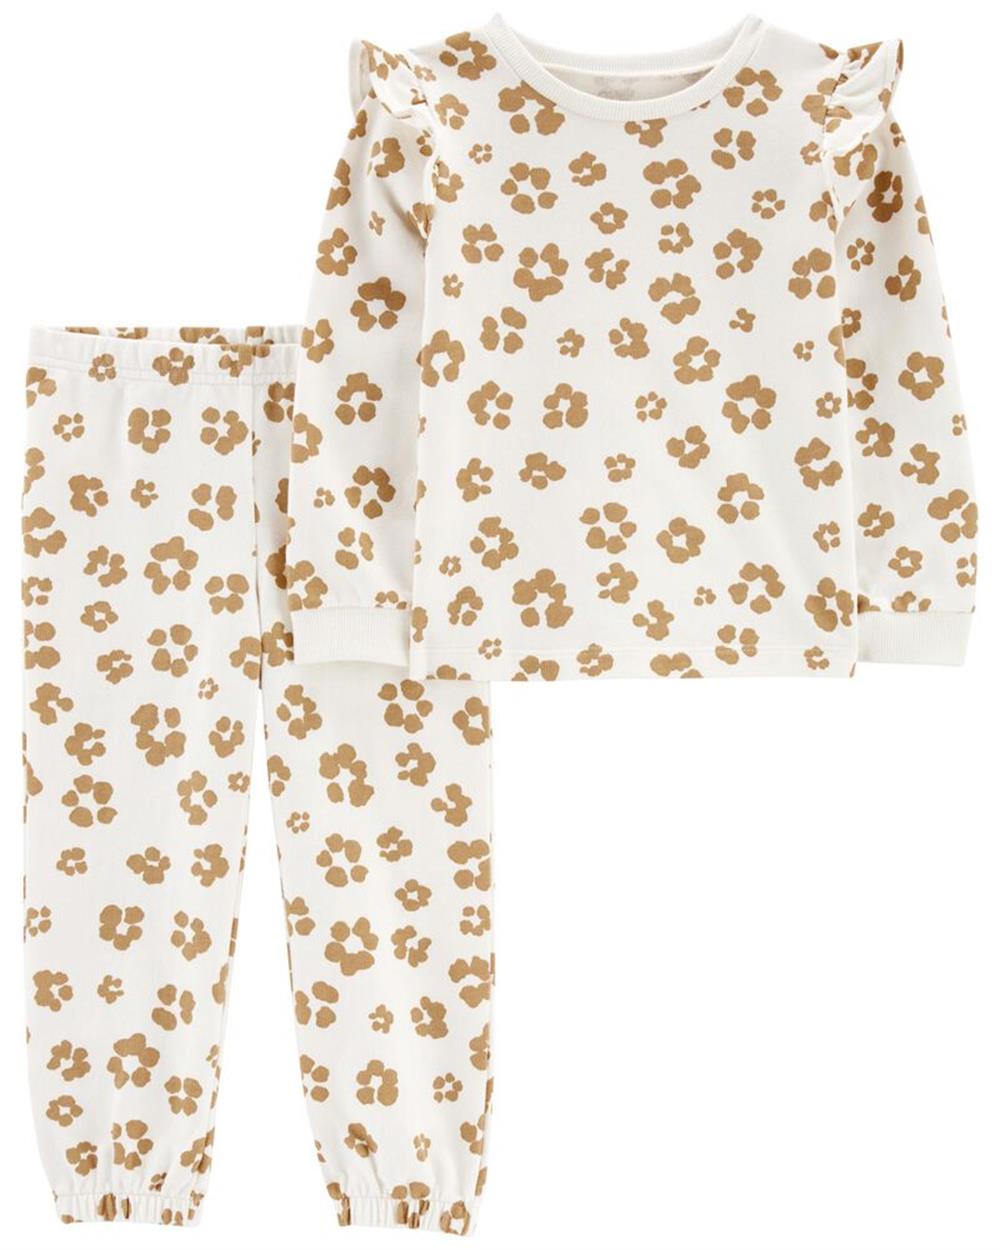 Carters Girls 2T-5T 2-Piece French Terry Top & Leopard Pant Set